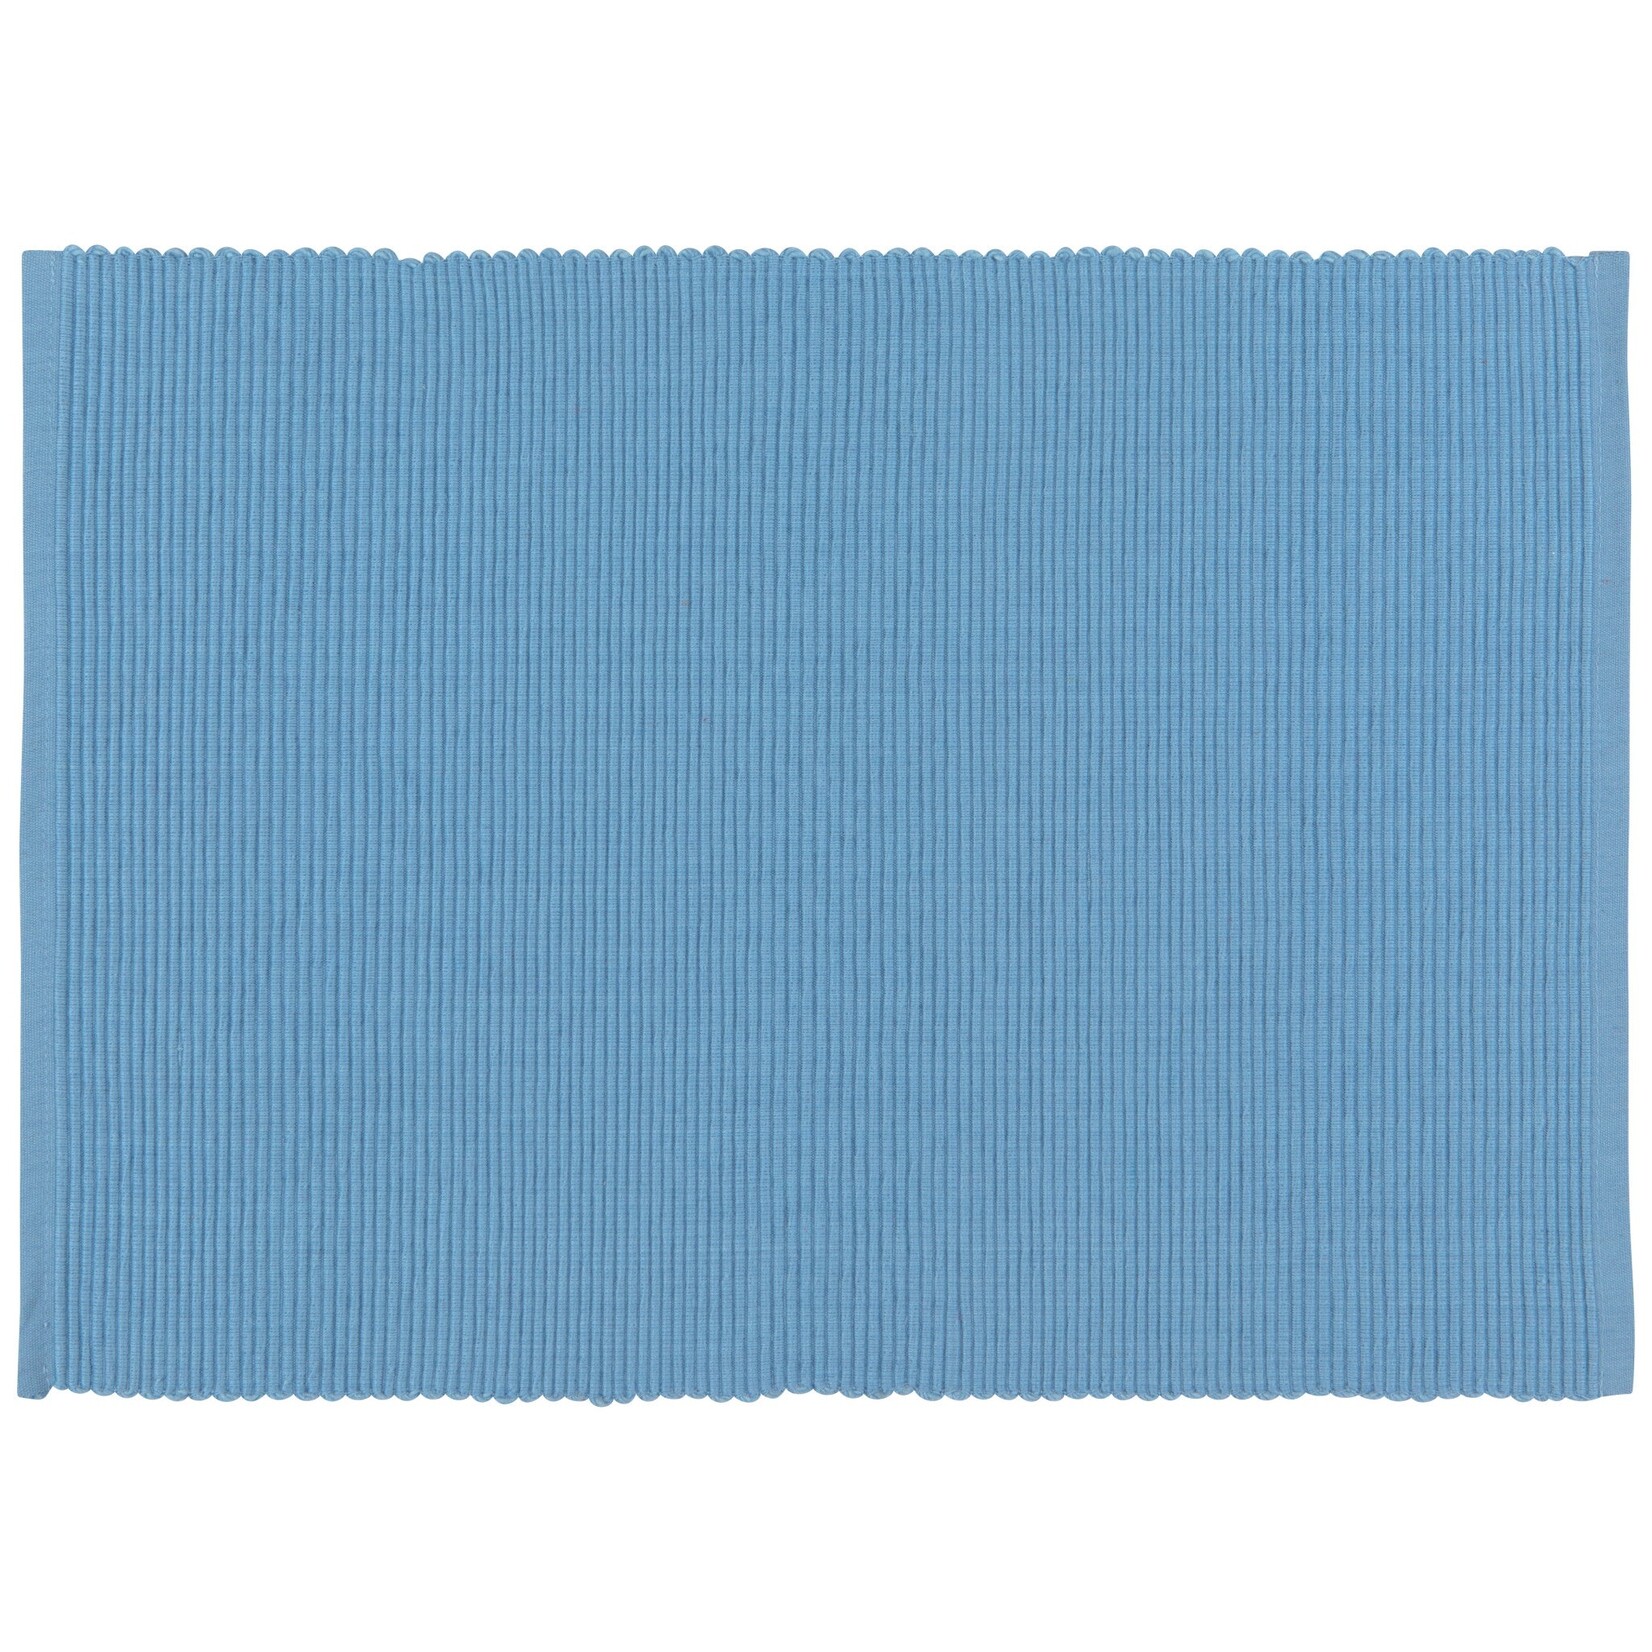 Spectrum Placemat - French Blue